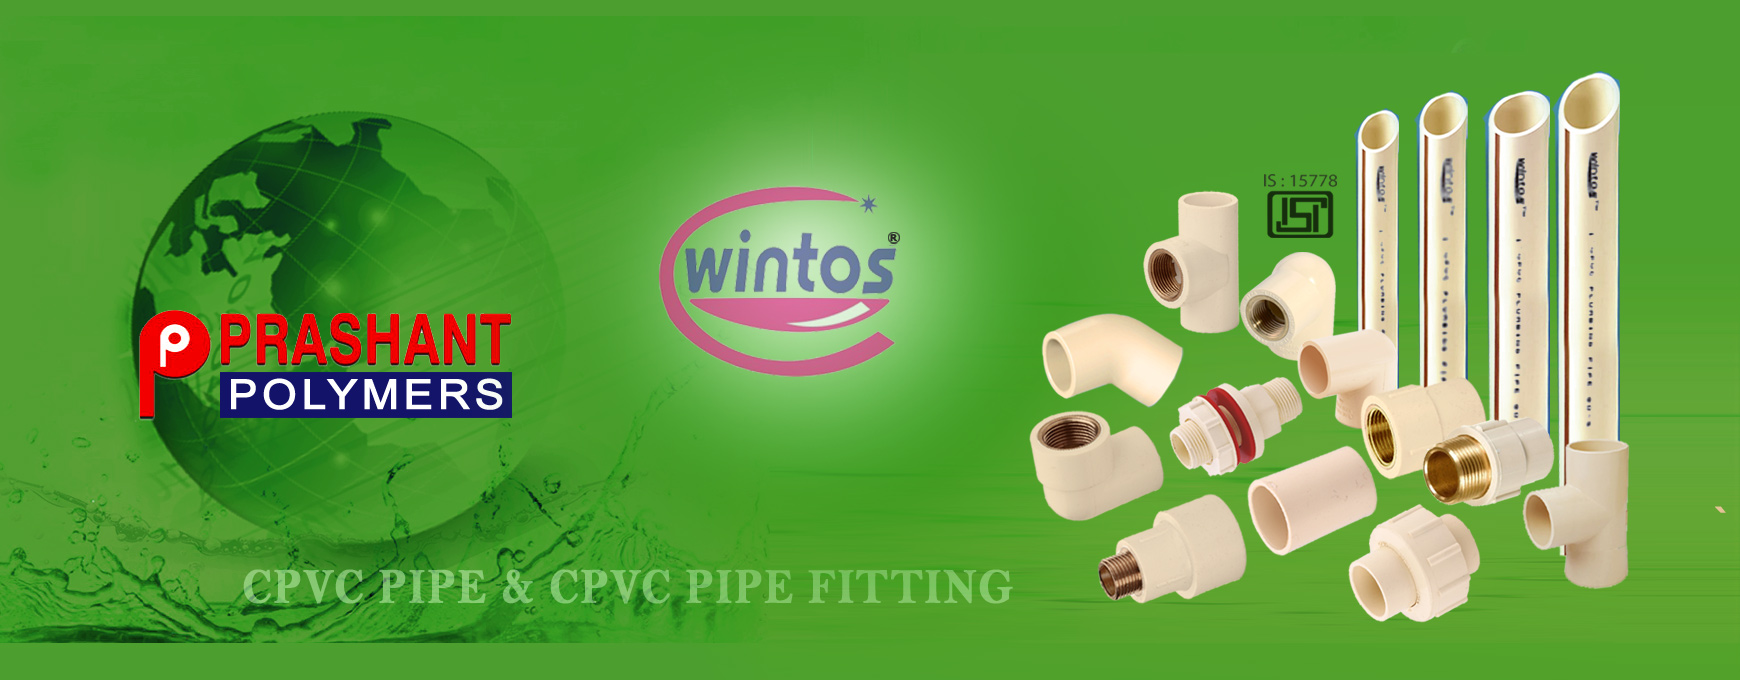 CPVC Pipe - CPVC Pipeline - Pipe Fitting - CPVC Brass Pipe Fitting Manufactures - Rajkot Gujarat India